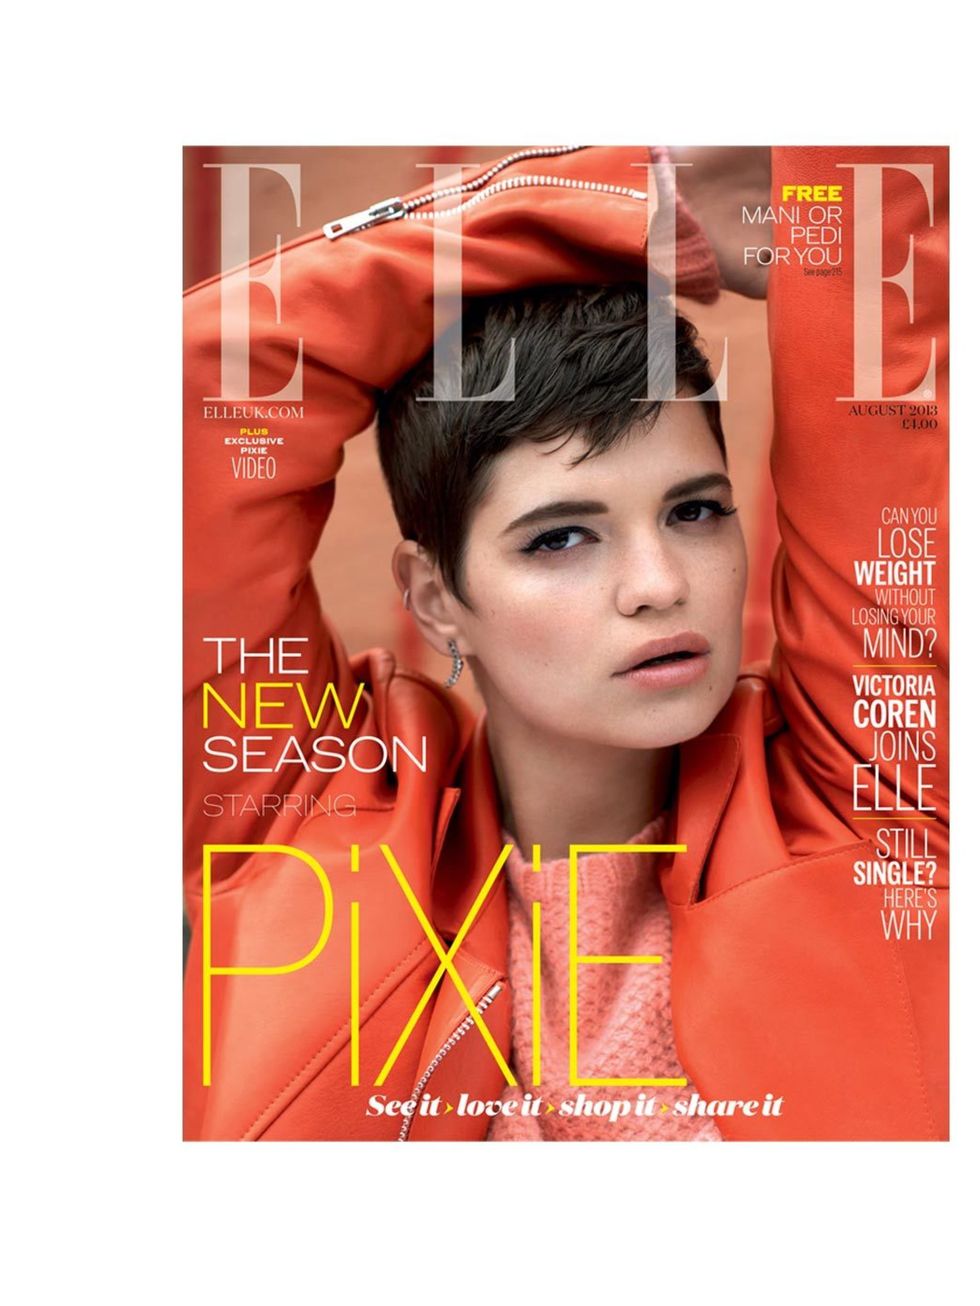 <p><a href="http://www.elleuk.com/magazine">August issue on sale Wednesday 3of July.</a></p><p><a href="http://www.elleuk.com/generic-pages/subscribe-to-elle">Click here to subscribe...</a></p>